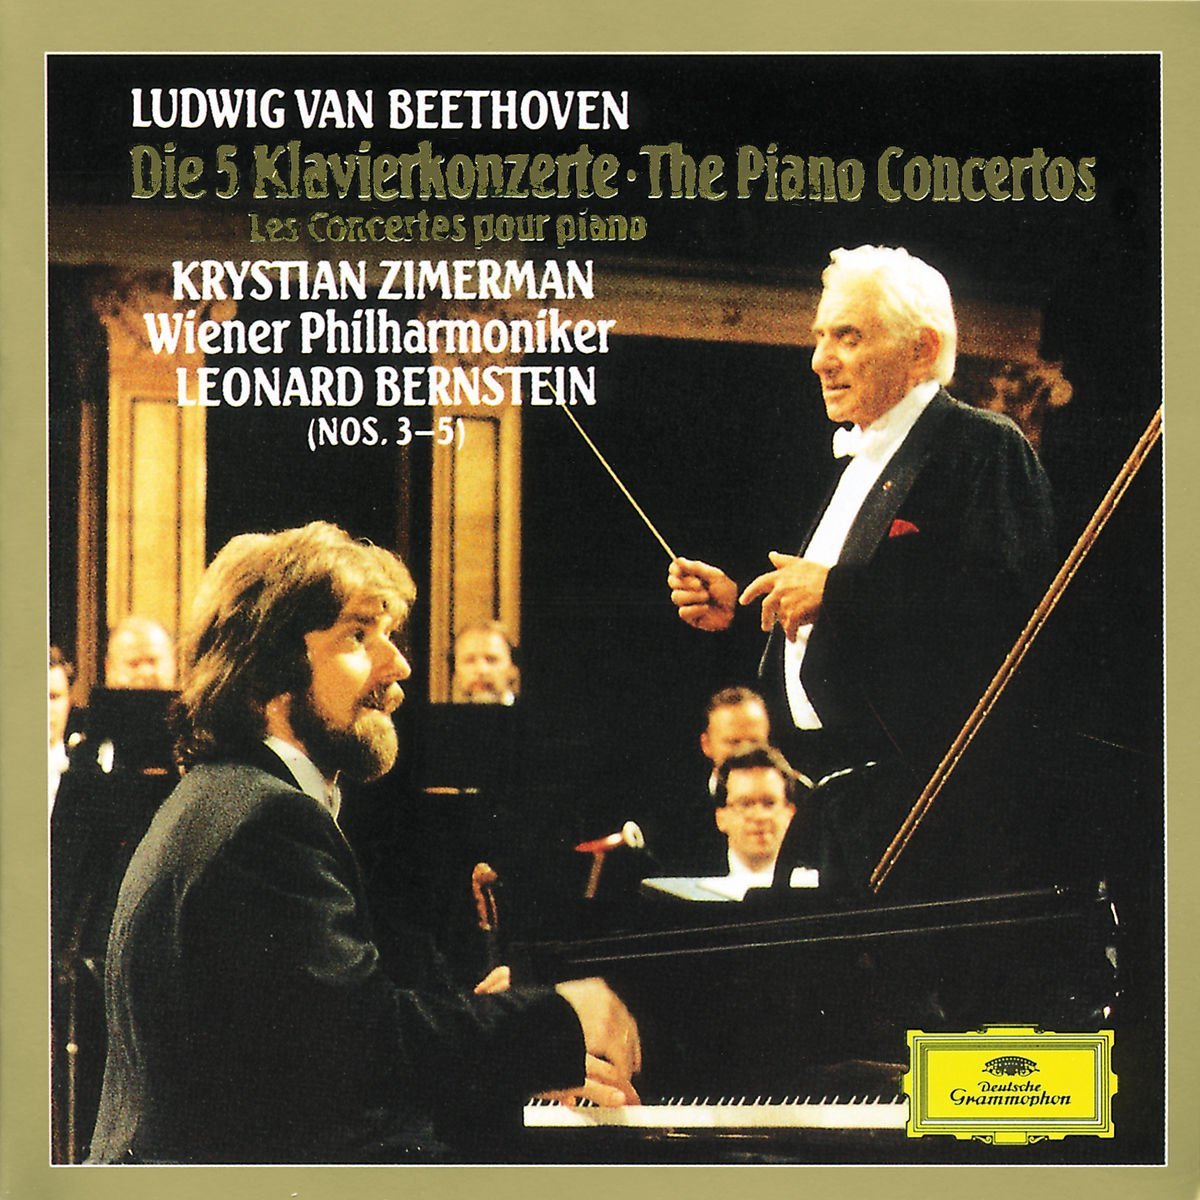 Leonard Bernstein | Keowell Covers - Your missing classical album covers